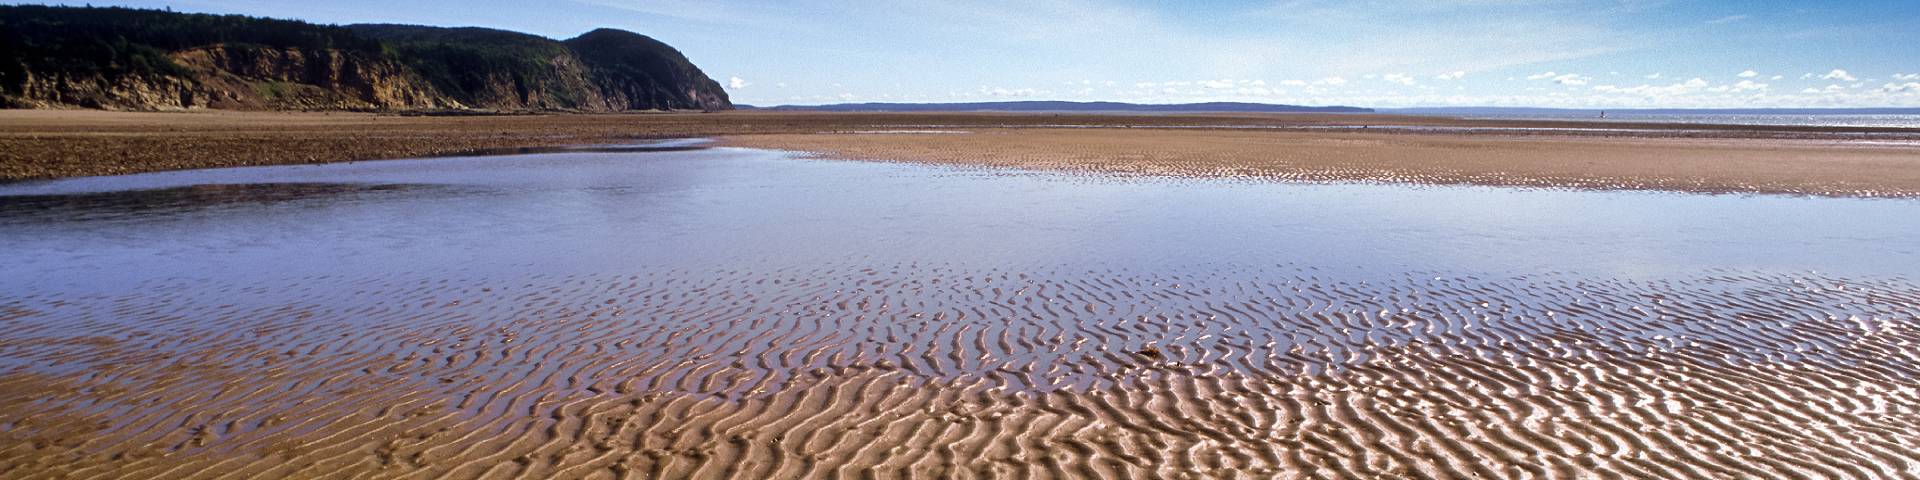 A view of a beach at low tide with the ocean recessed far away